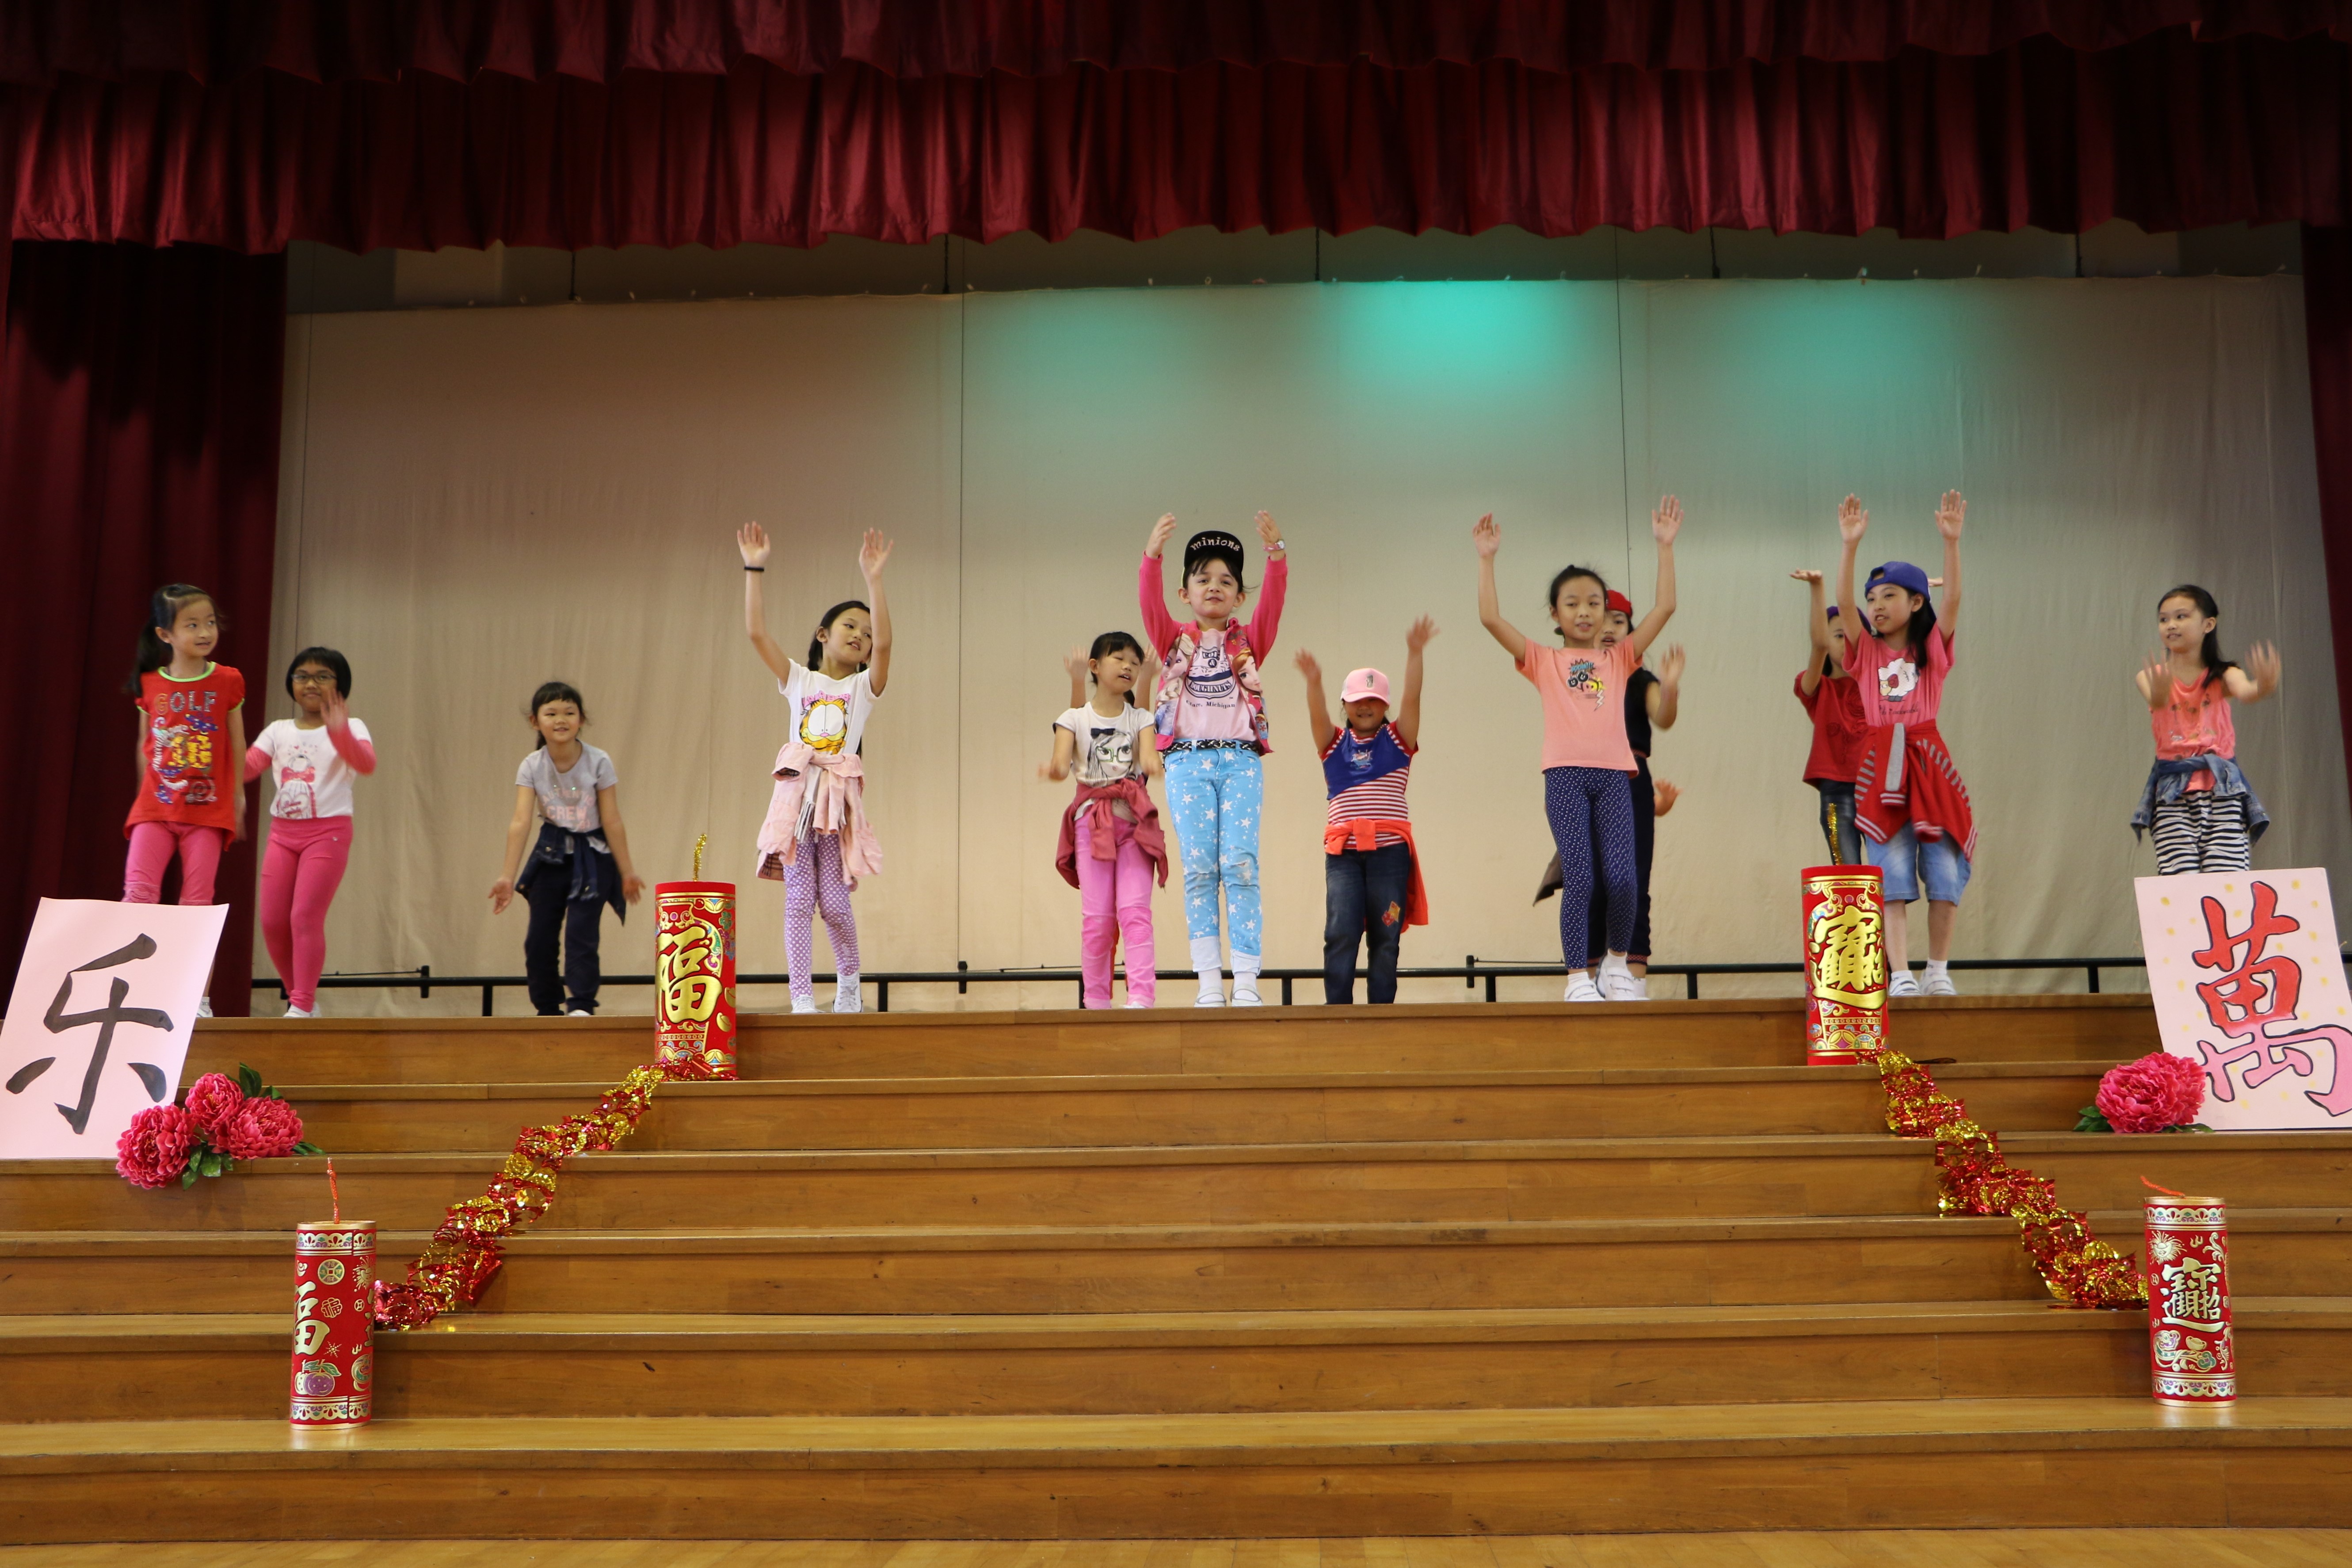 Primary 3 Students singing and dancing to an upbeat Chinese New Year song